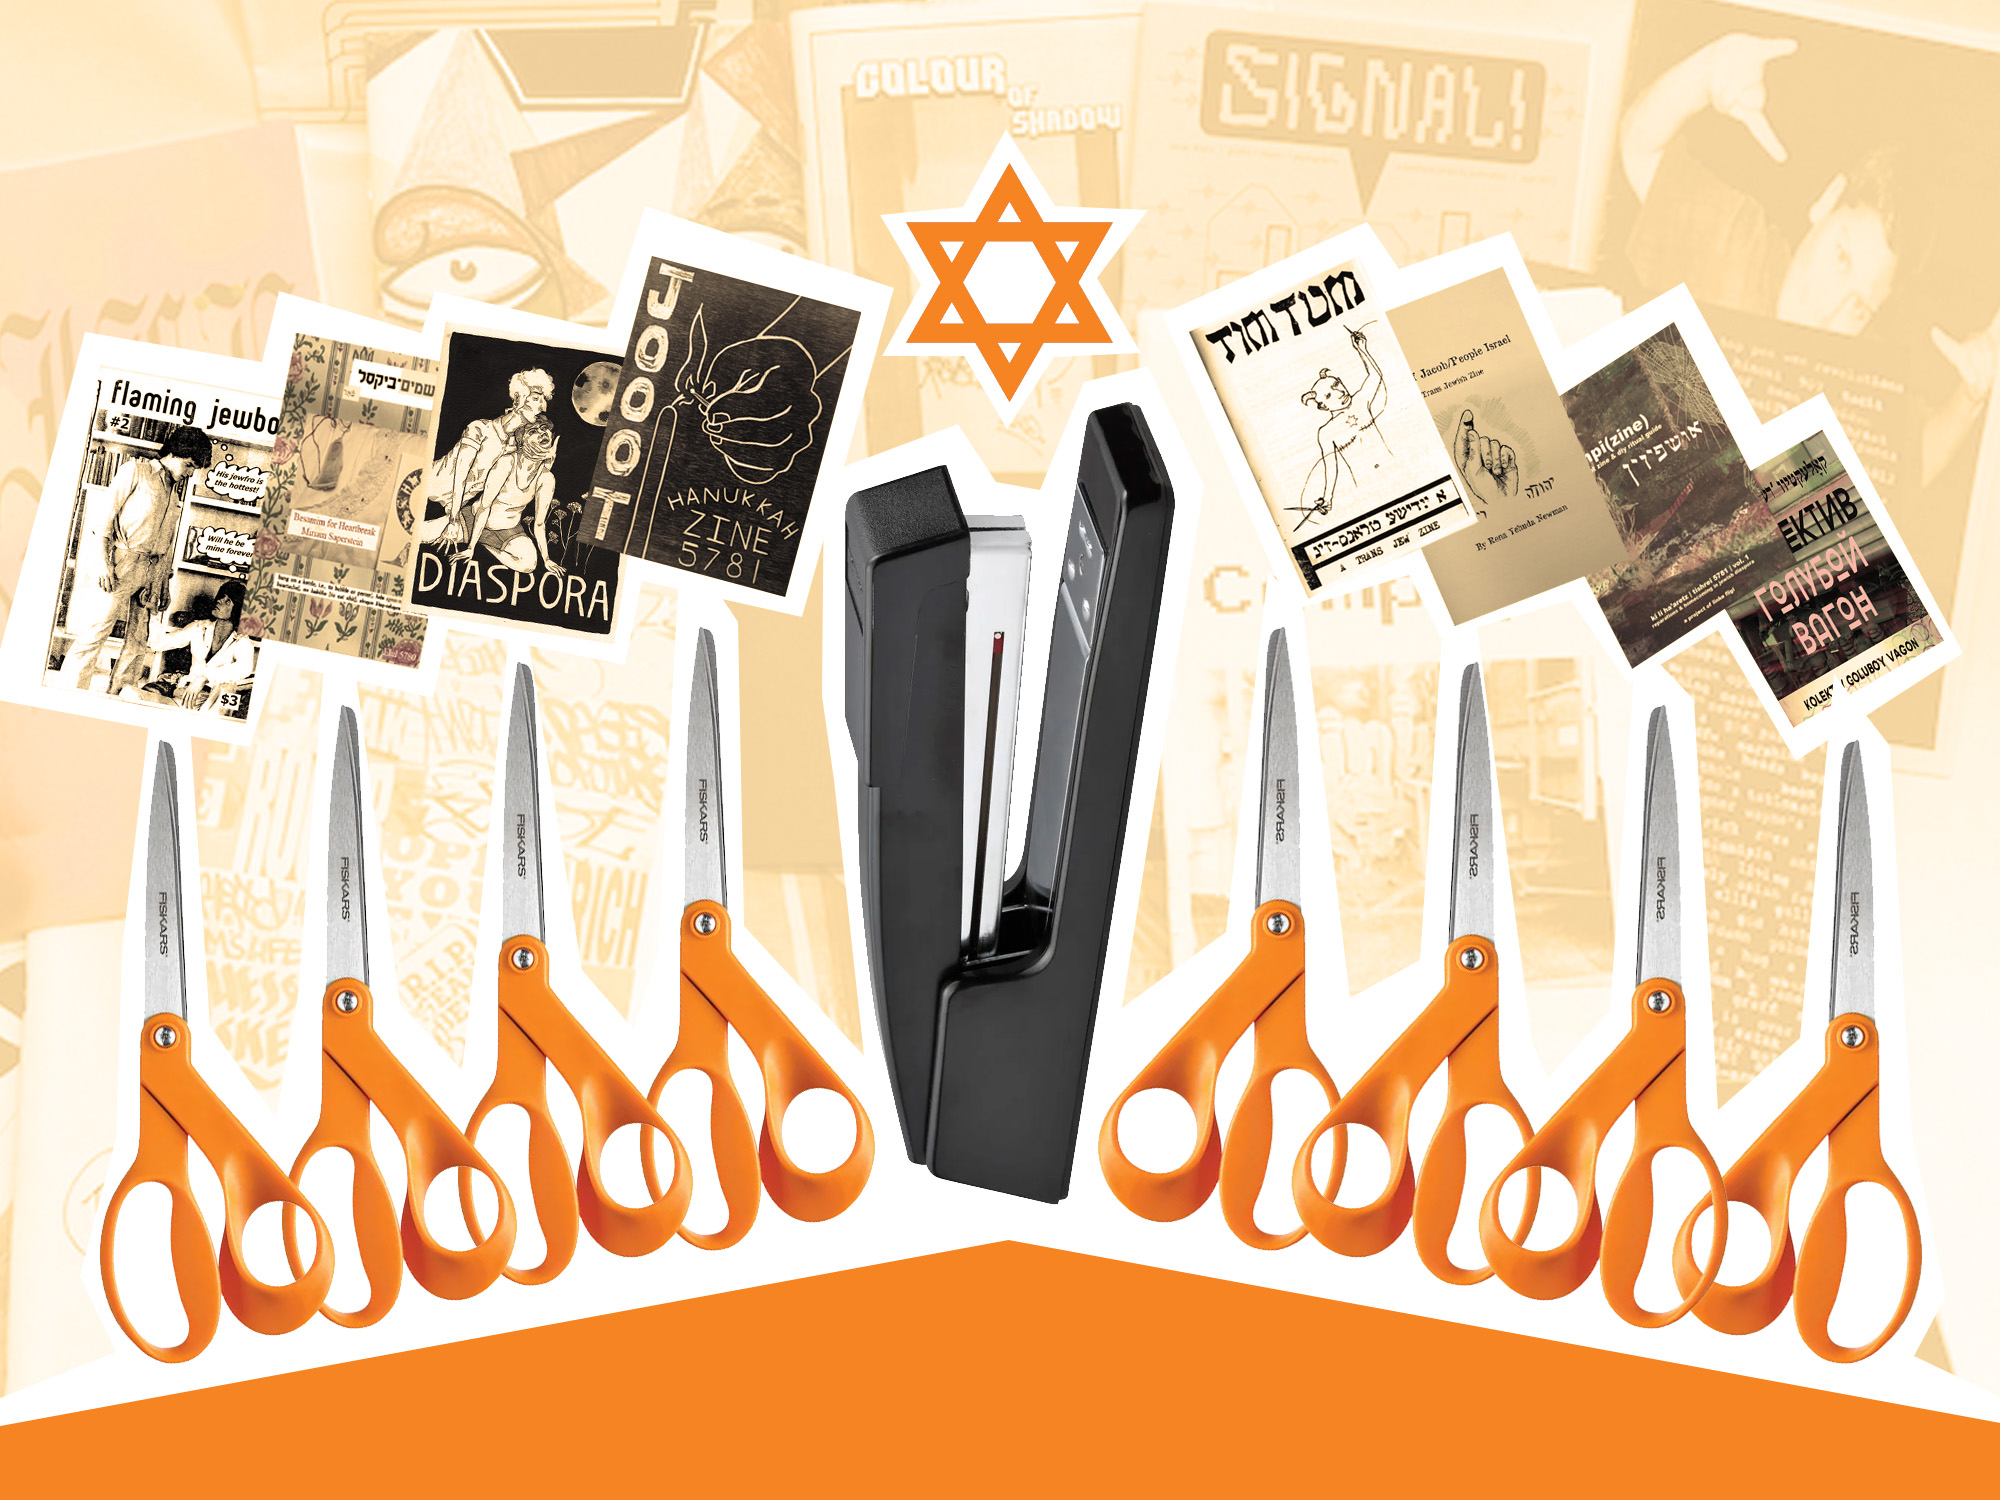 A symbolic menorah made of scissors and a stapler as the shamas, with 8 Jewish zines as "candles"